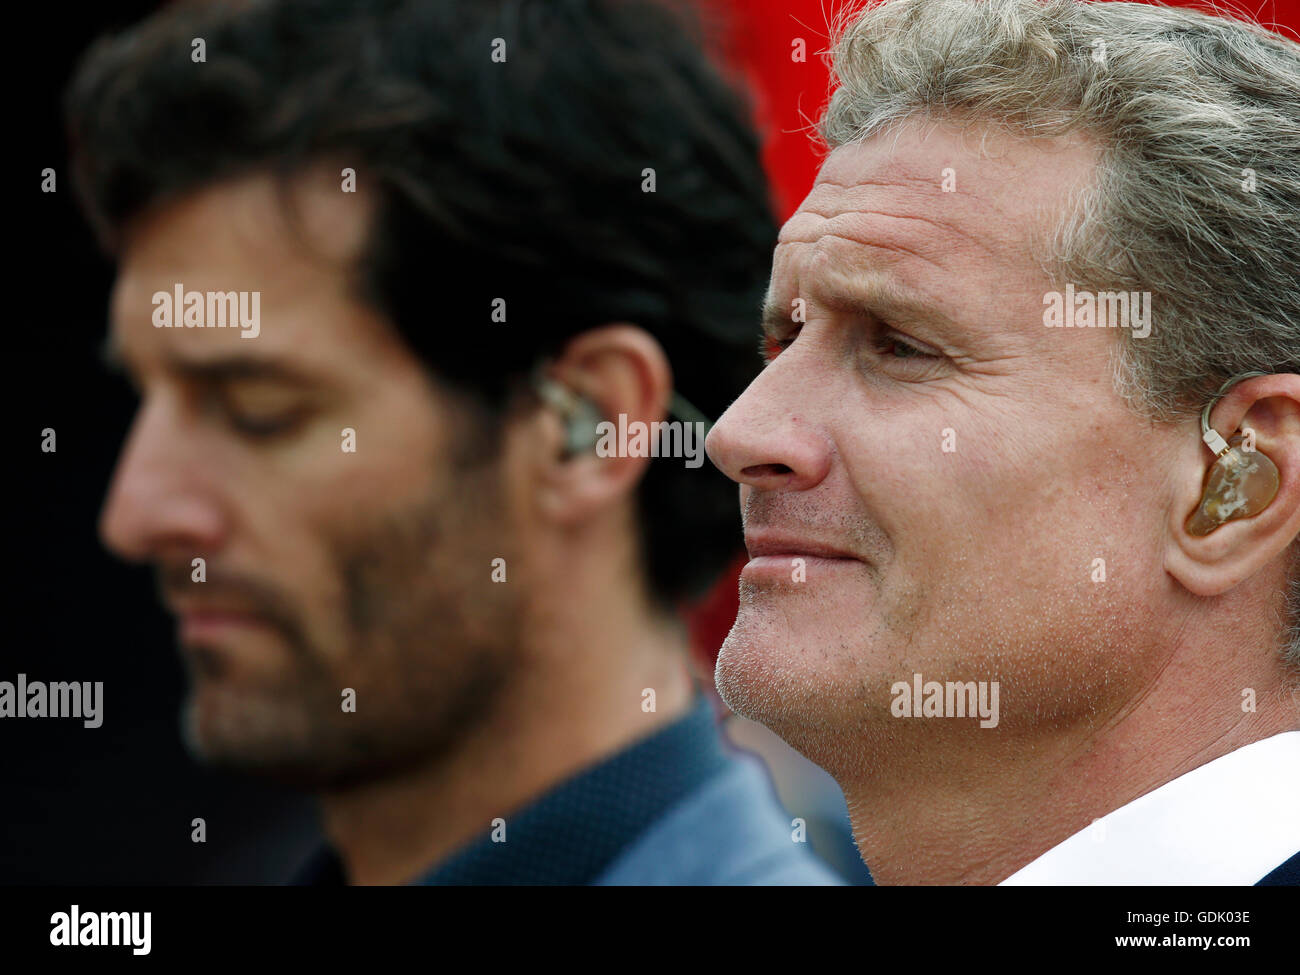 David Coulthard (R) and Mark Webber (L) present Channel 4's Formula One coverage from Silverstone during the British Grand Prix Stock Photo